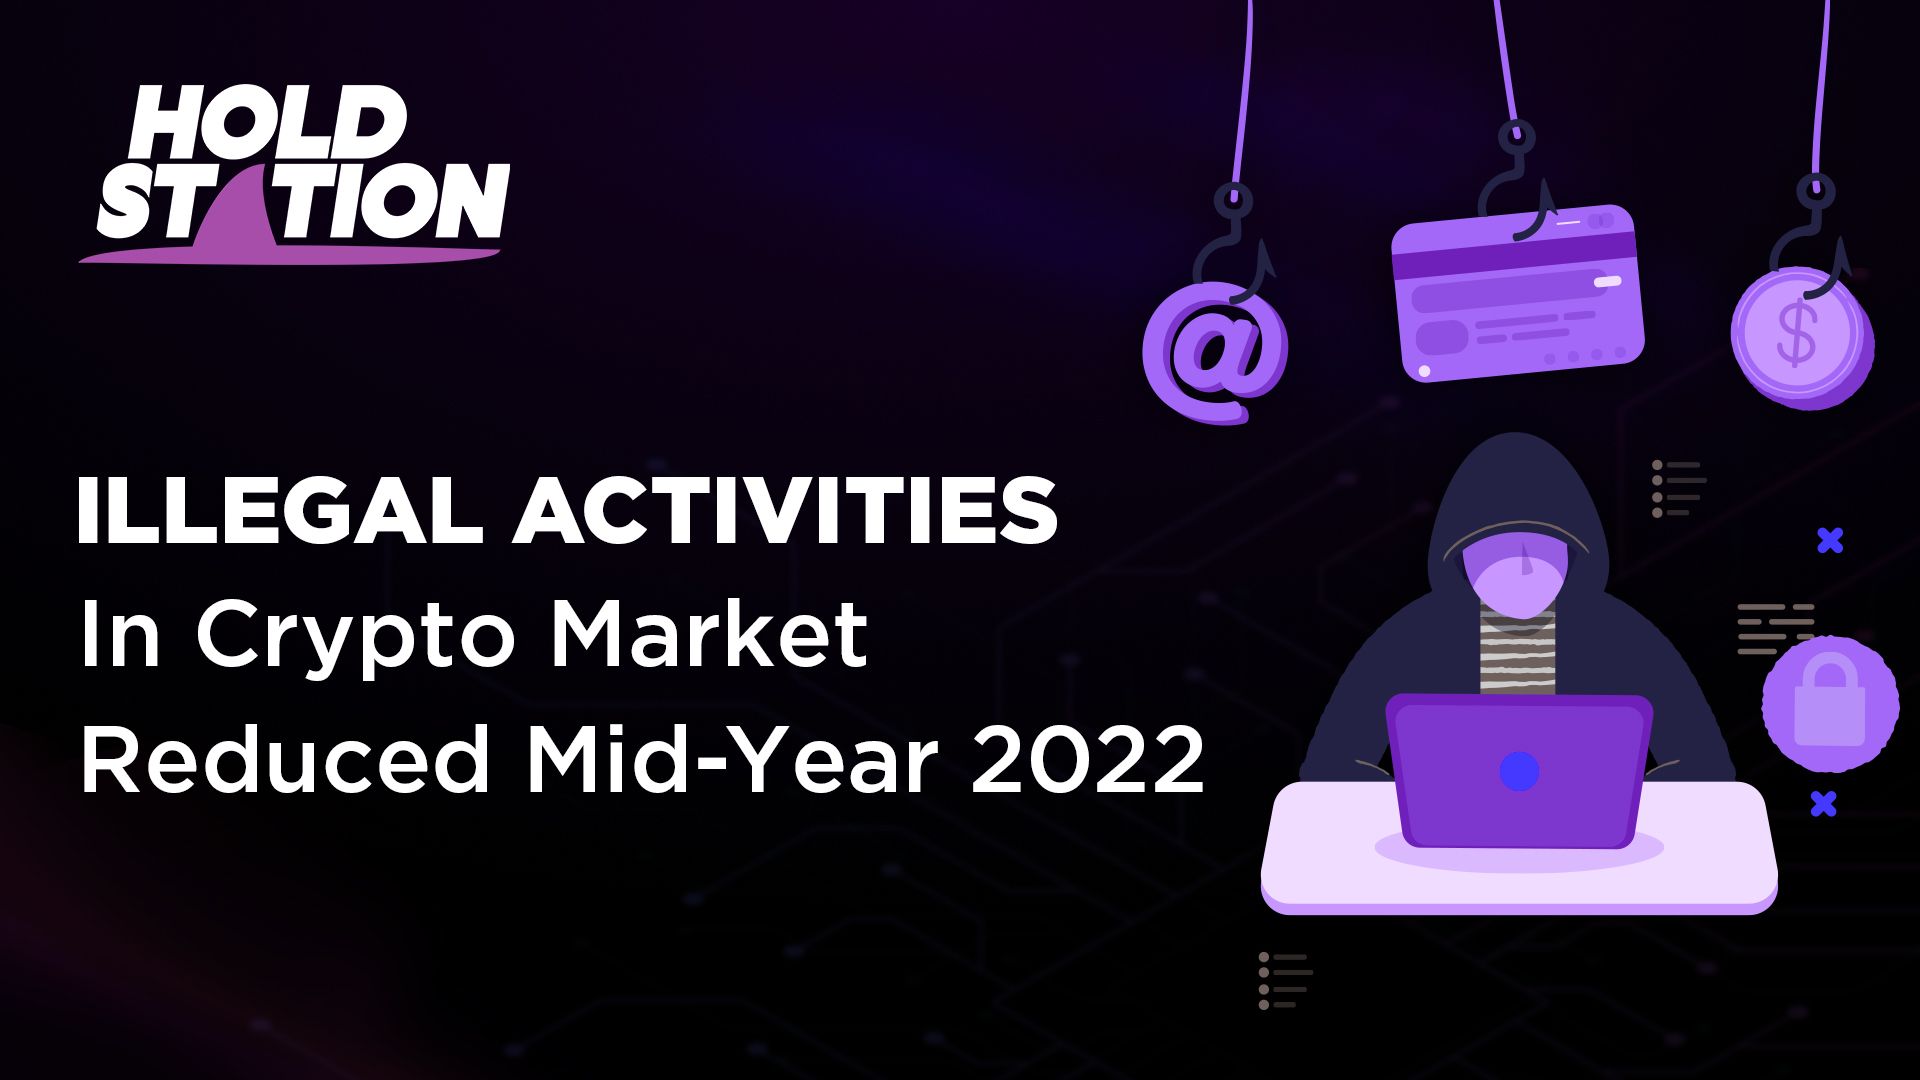 Crypto criminal activities dropped in Mid-2022